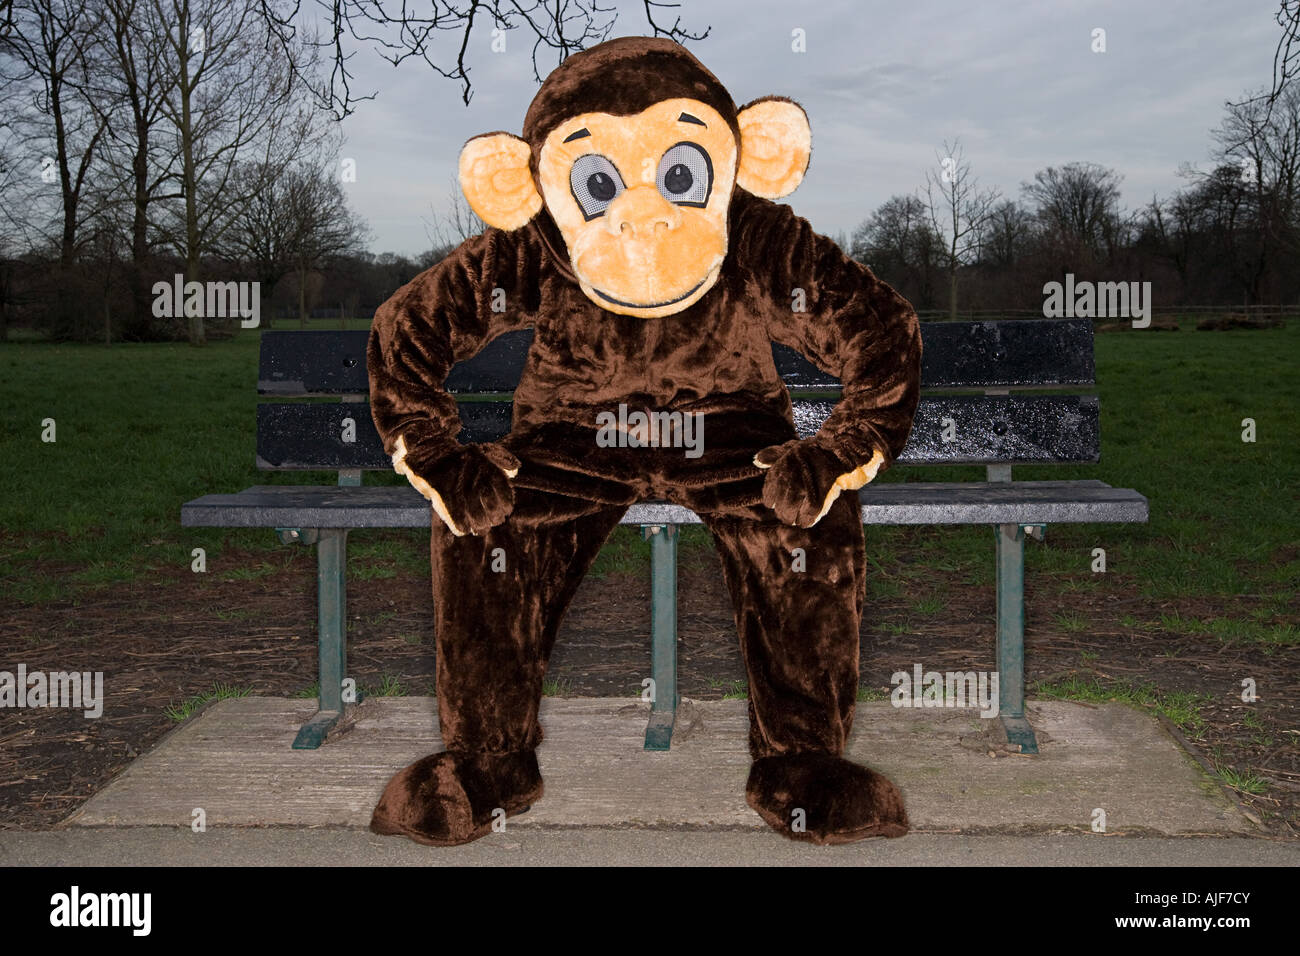 Person in monkey costume on bench Stock Photo